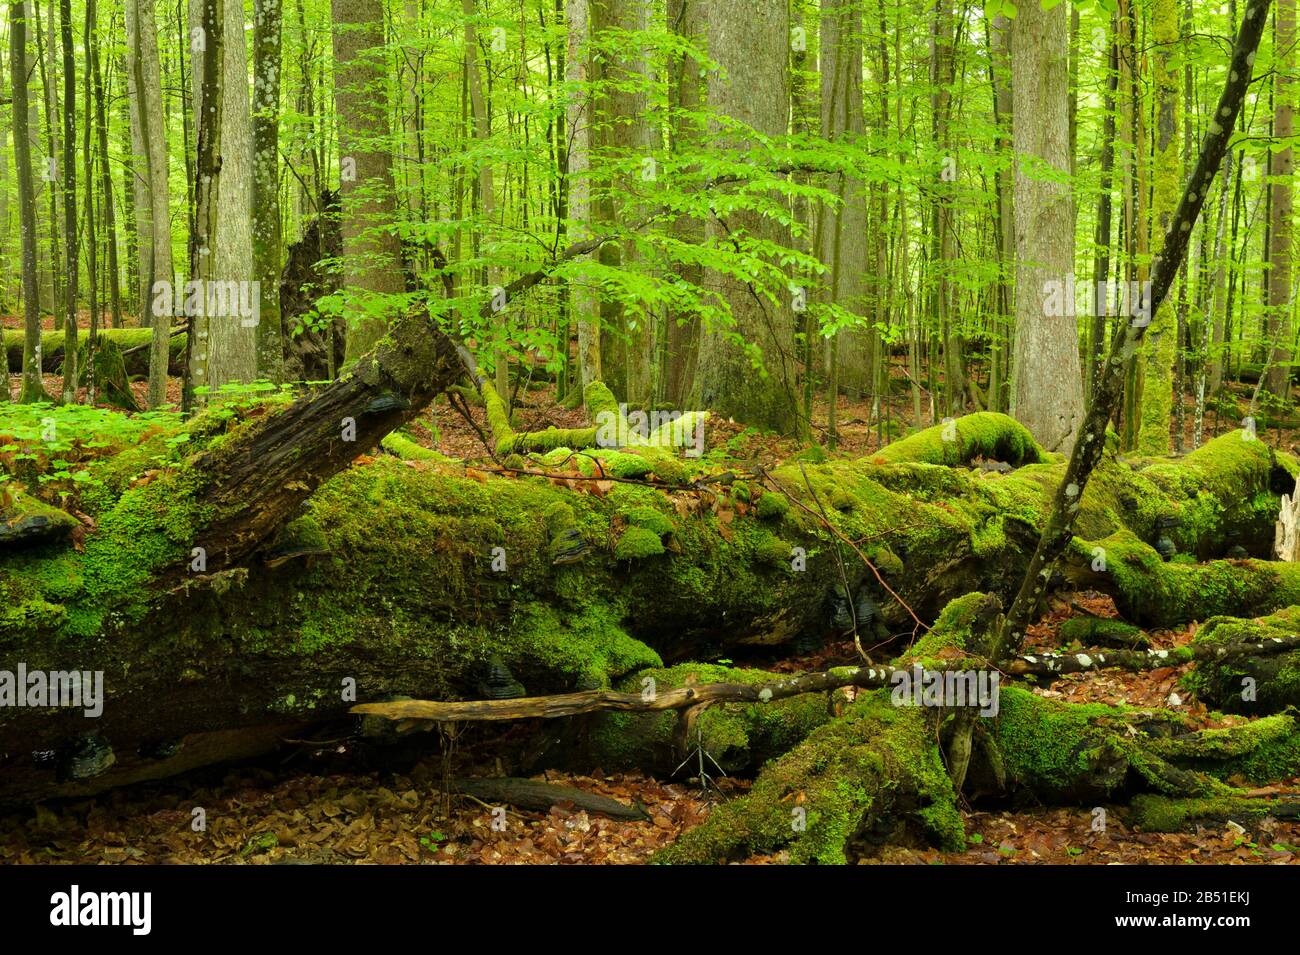 Bavarian Forest National Park / Germany: 'Mittelsteighütte' is one of the last primary forest remains in Germany with tremendous biodiversity value. Stock Photo